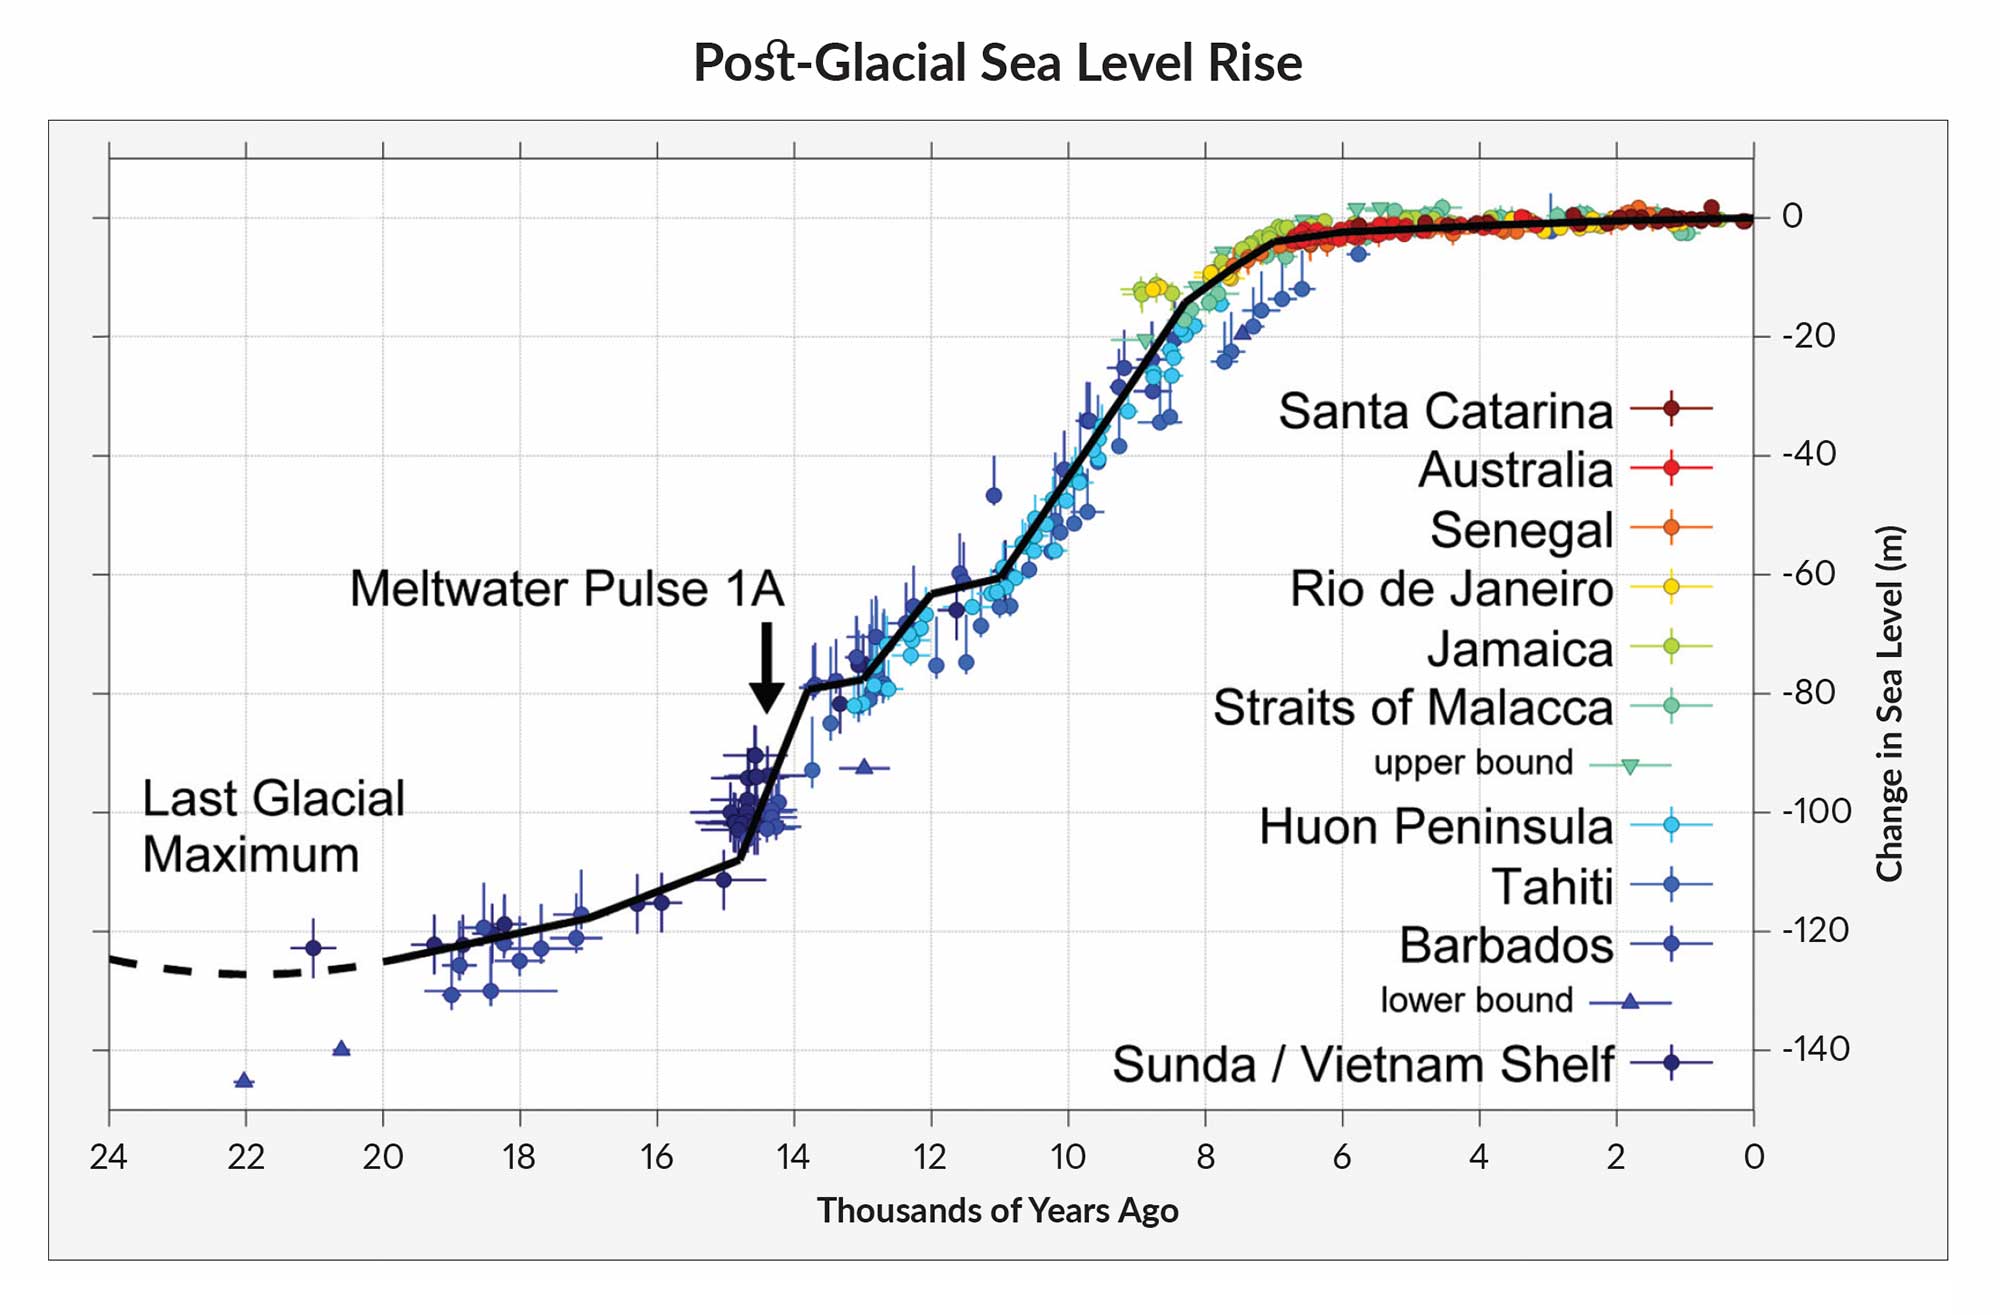 Sea level rise for the last 24,000 years